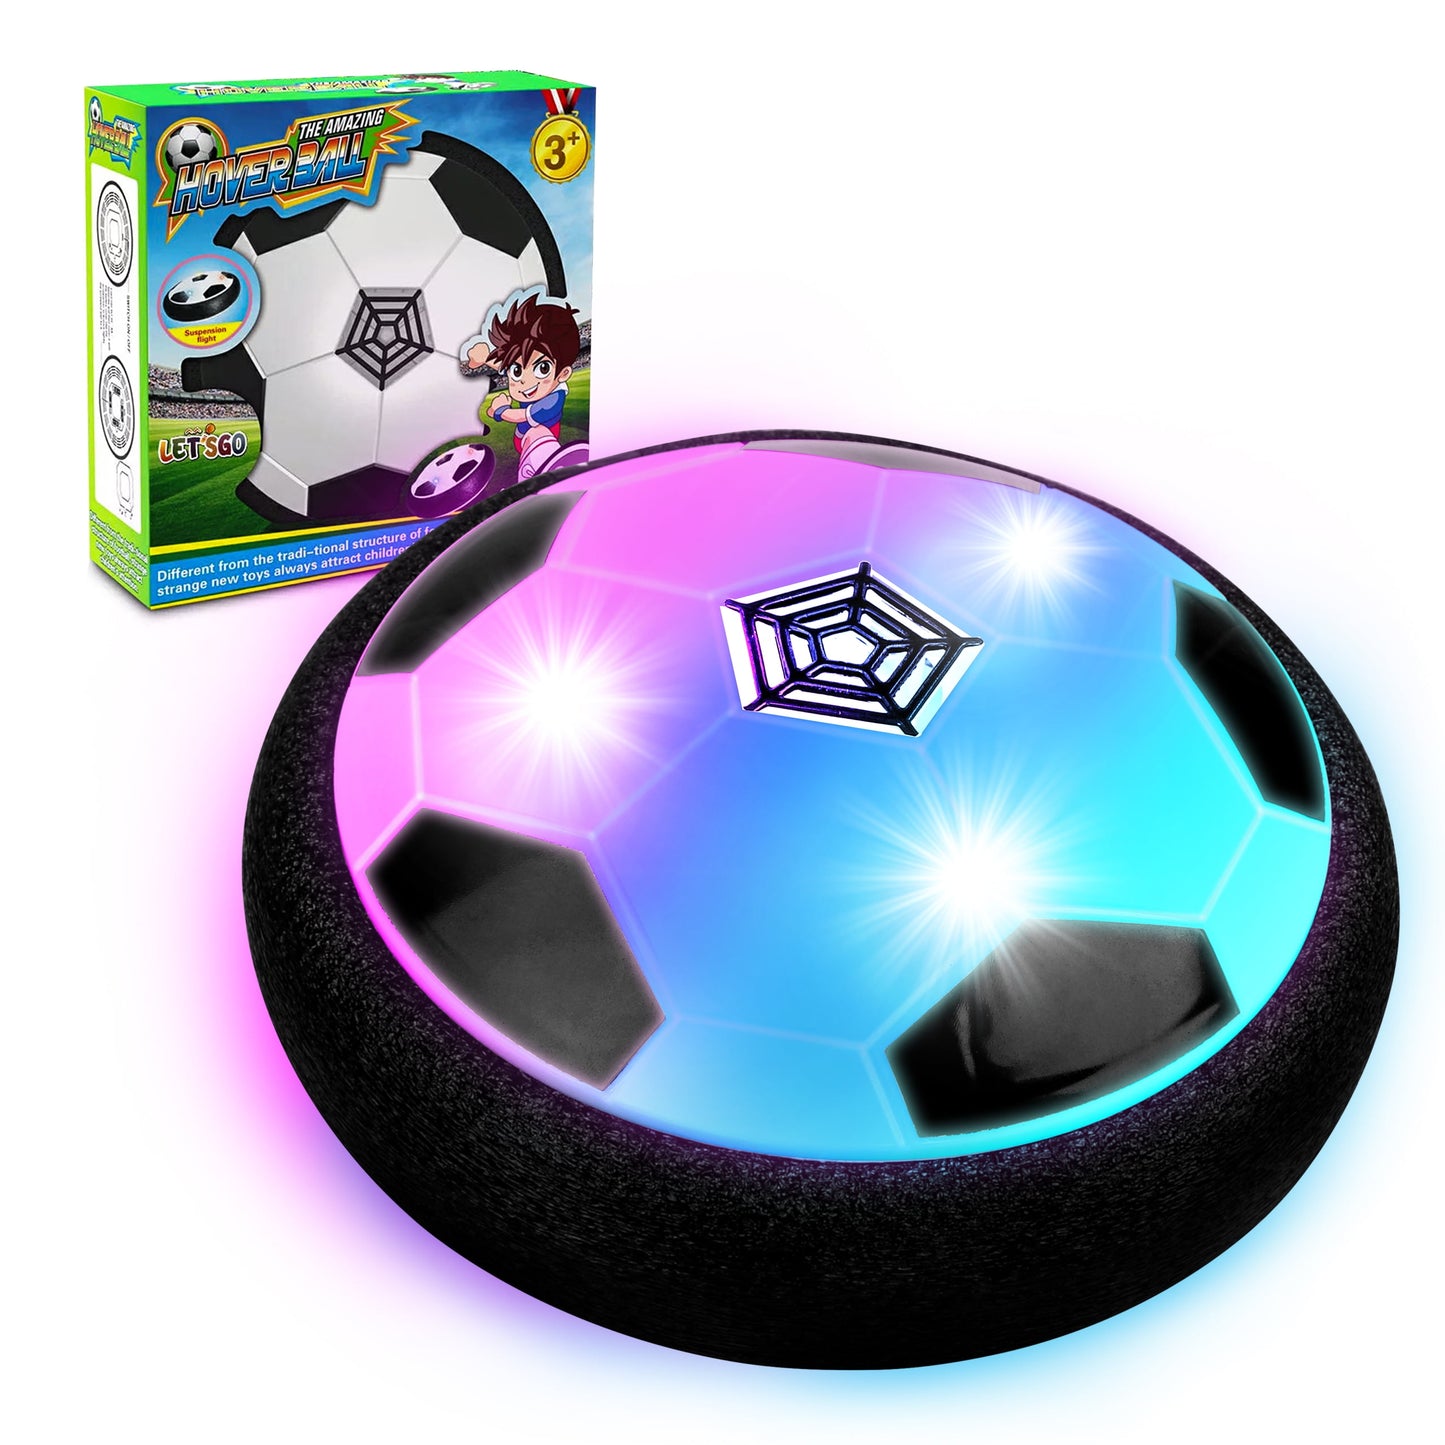 Hover Soccer Ball Toys for Boys & Girls, LED Soccer Ball with Foam Bumpers Indoor/Outdoor Games for Kids